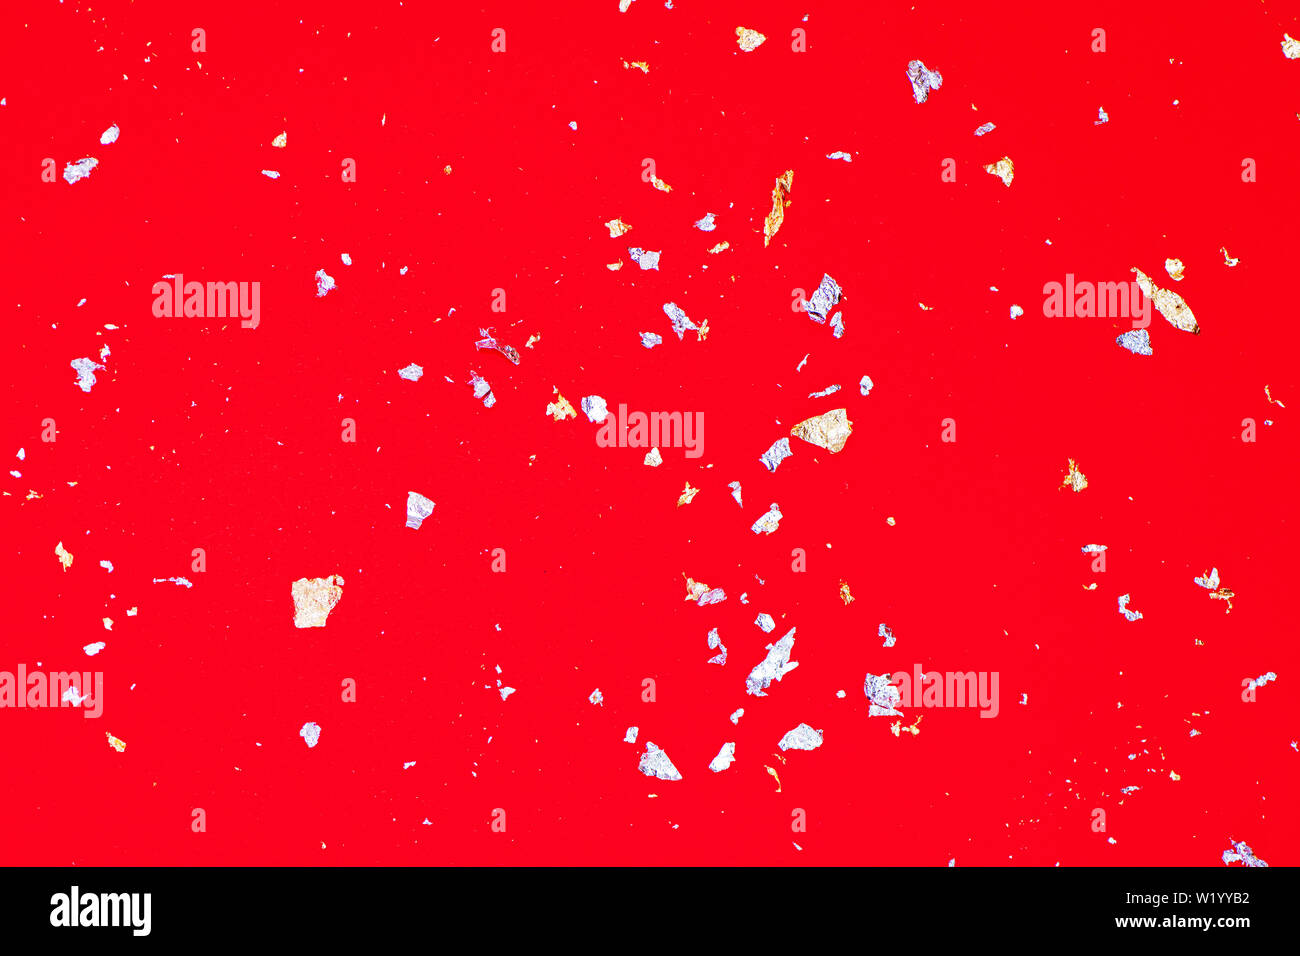 Golden and silver sparkles on bright red background. Festive background for your projects. Stock Photo